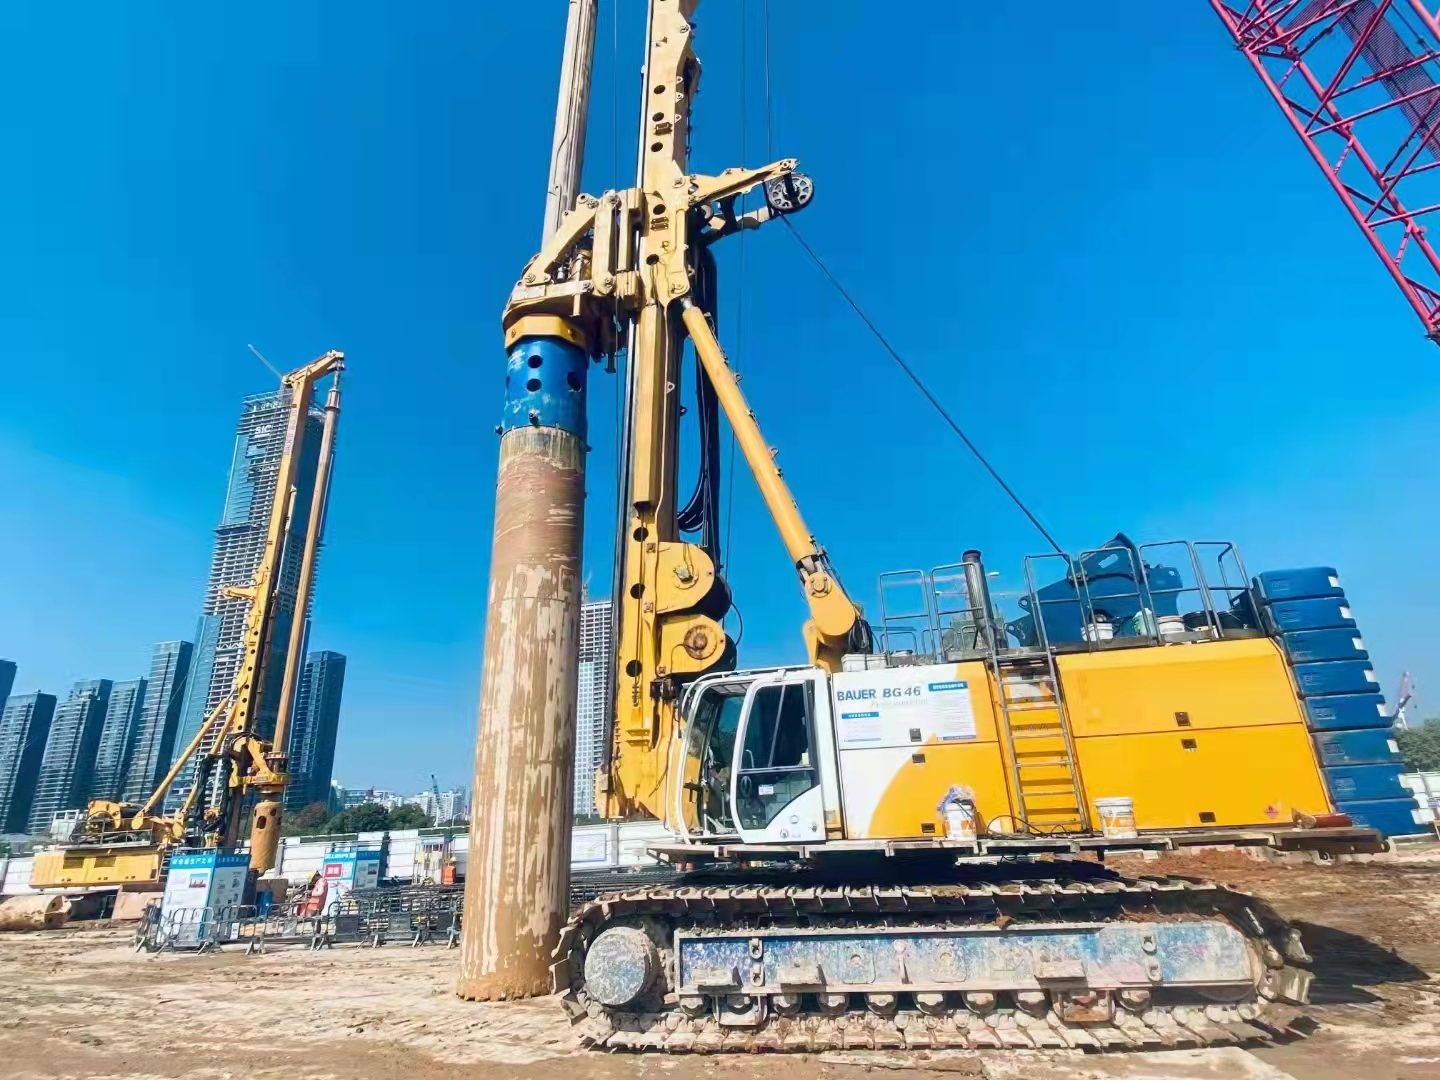 Casing a joint fulled casing with drive pipe head foundation drilling rigs casing 